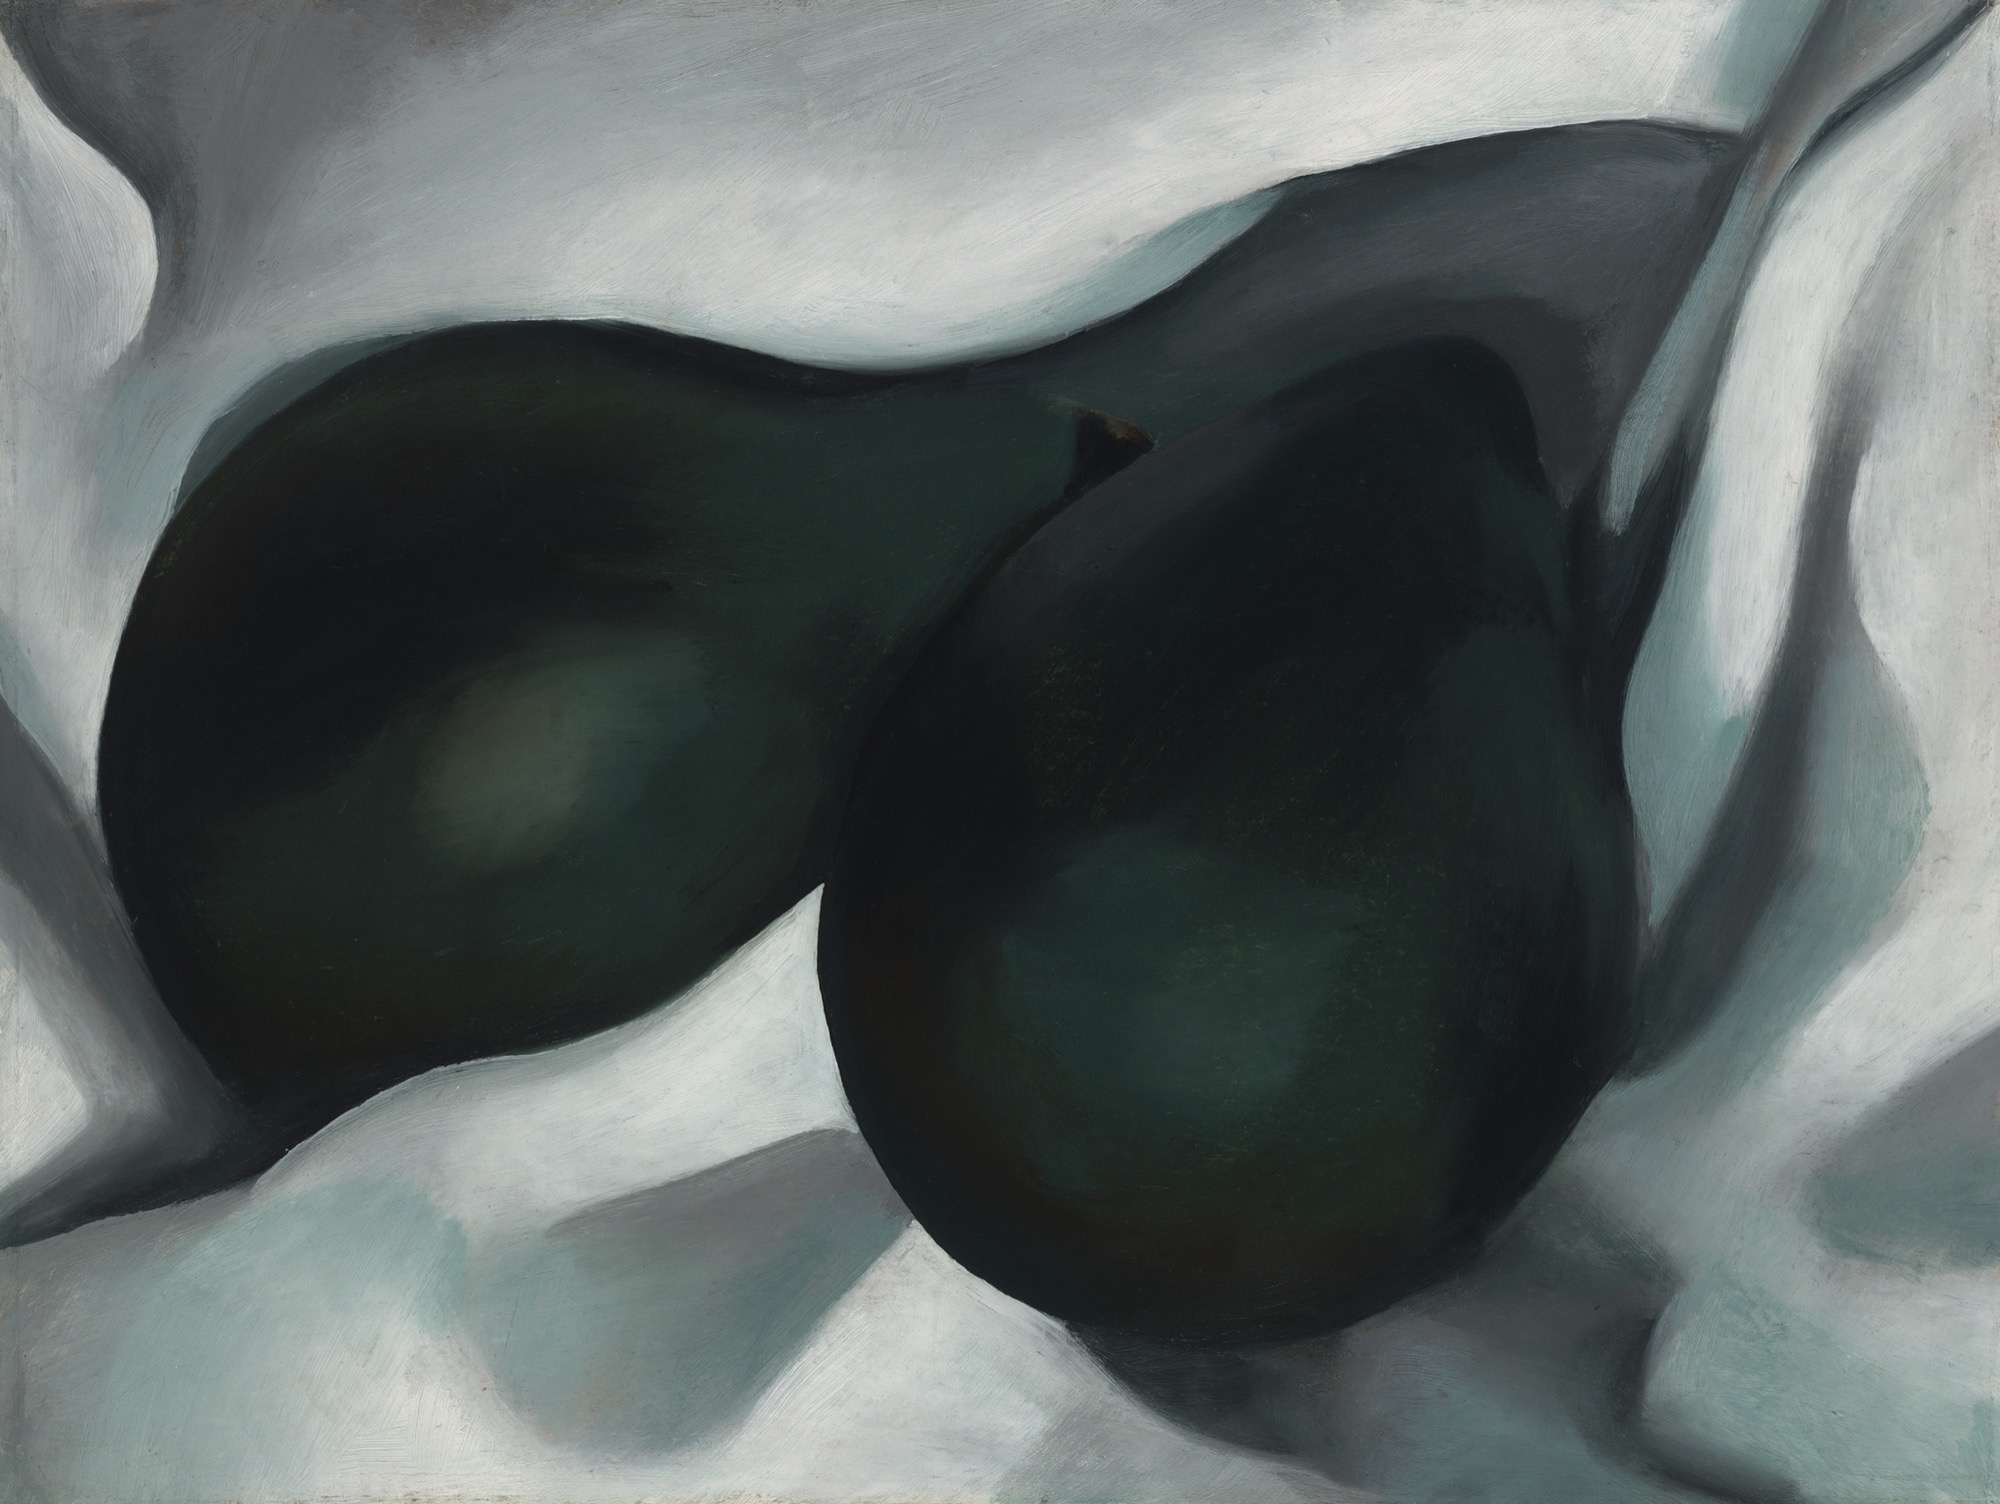 This beautiful composition consists of two dark green pear-esque shapes placed onto a seemingly silky cloth.